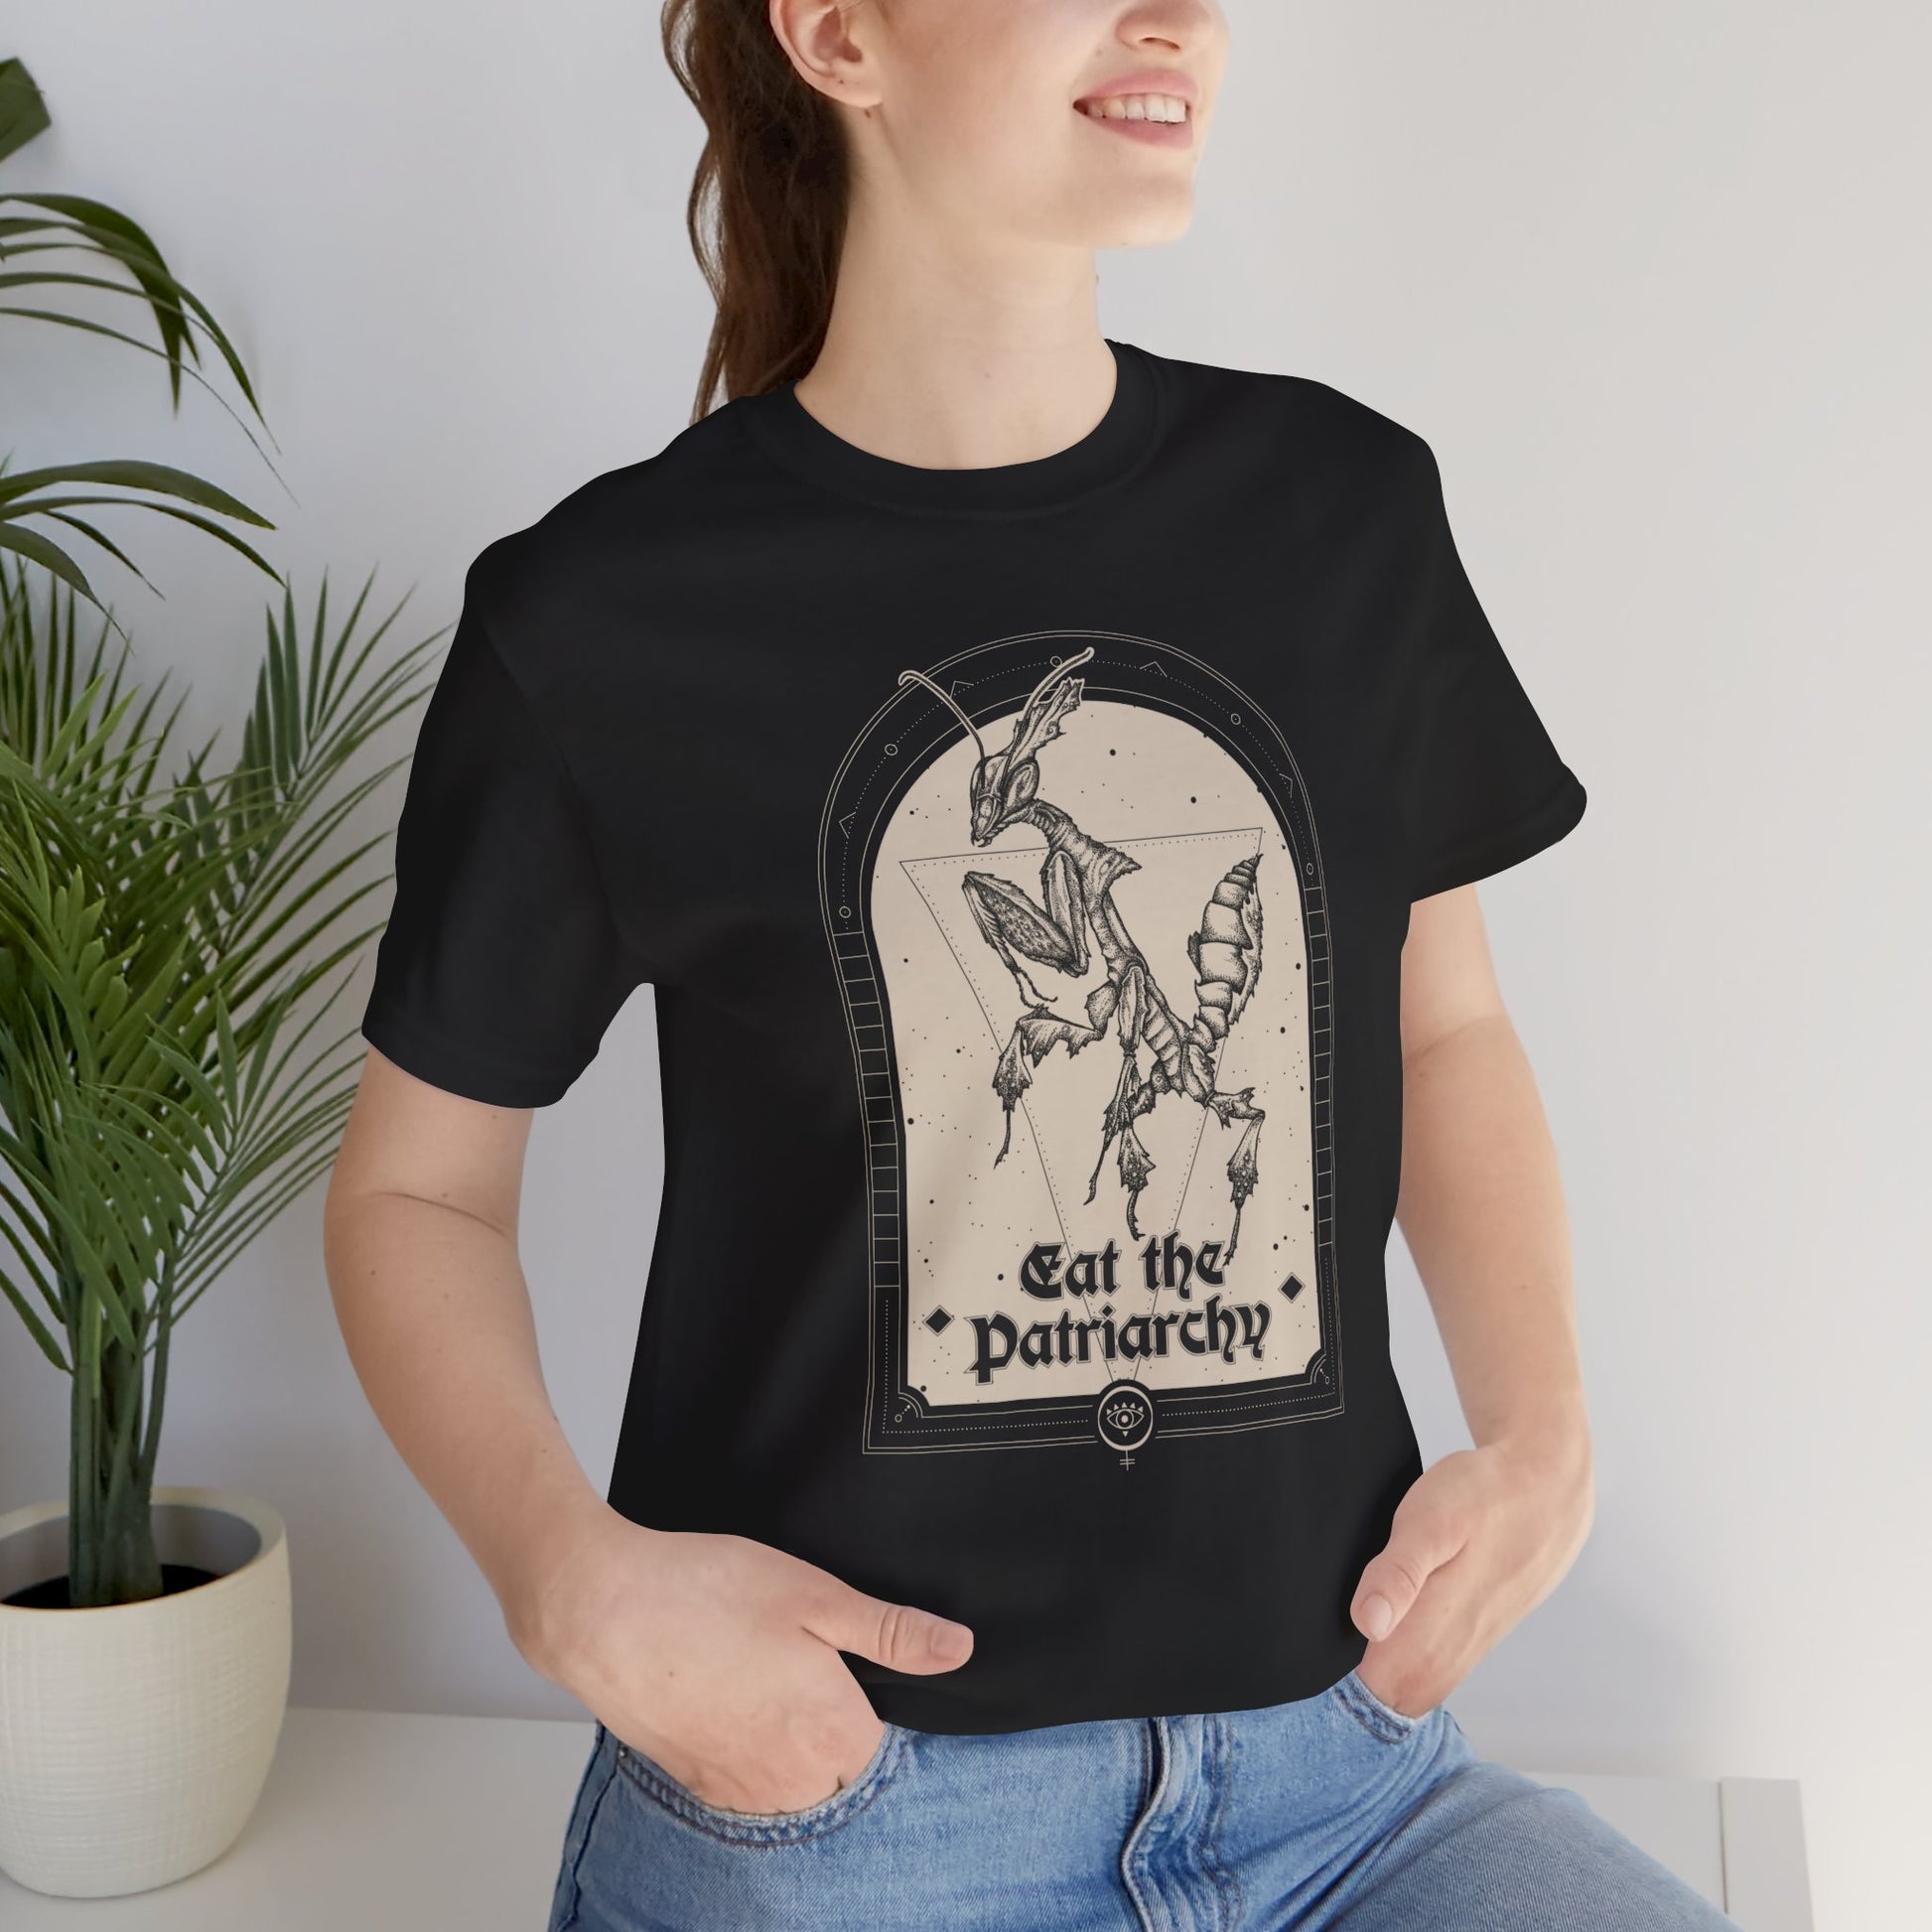 a pretty young adult woman wearing a goth black thirt with a witchy feminist praying mantis illustration that says "eat the patriarchy"